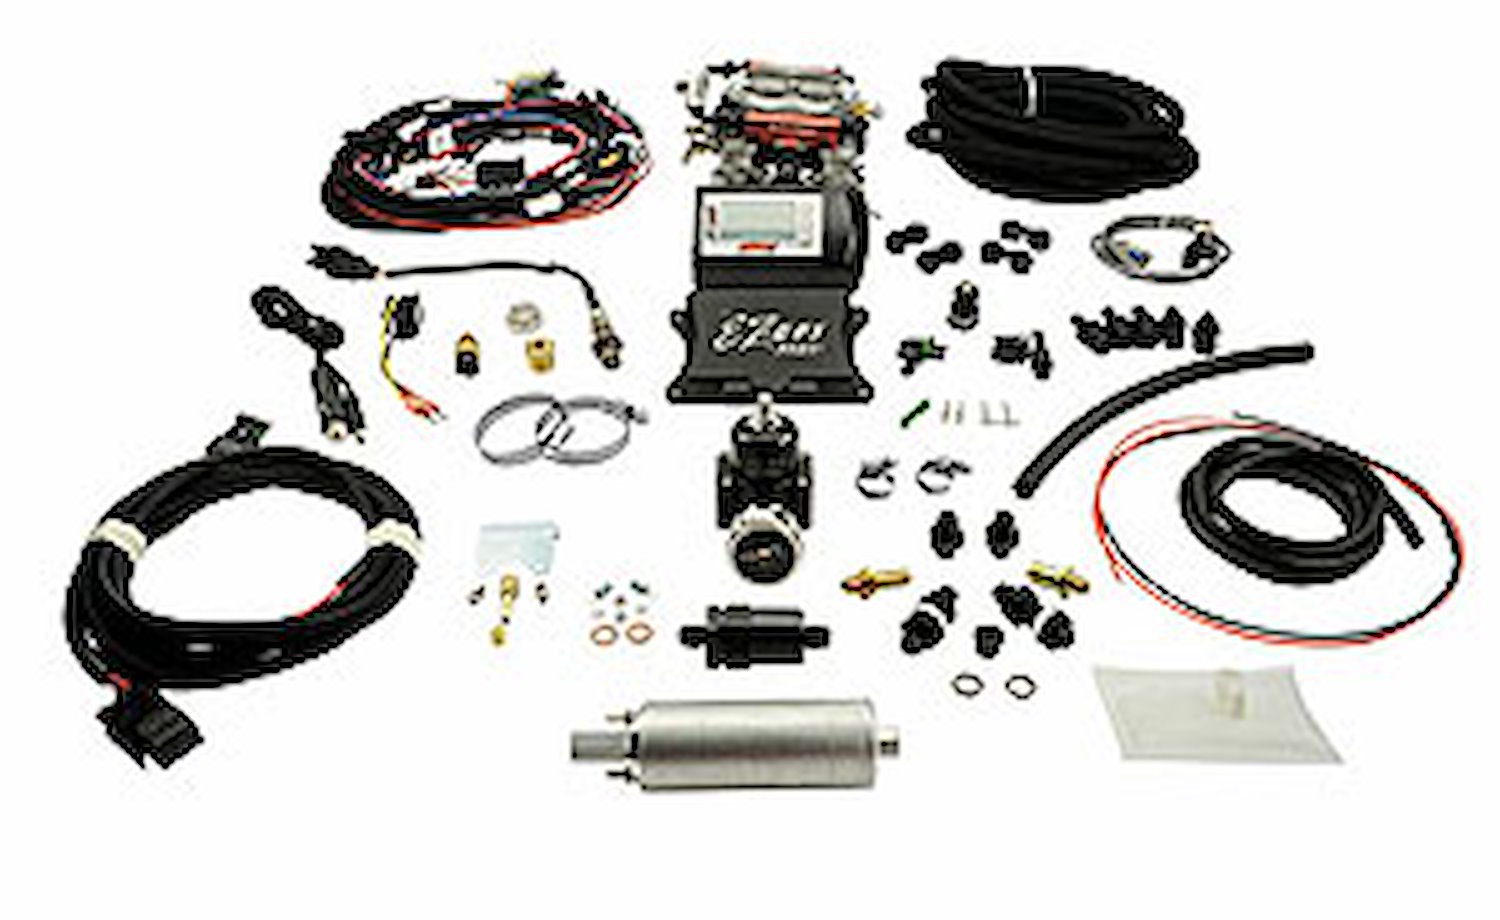 EZ-EFI Self-Tuning Fuel Injection Master Kit Includes: Throttle Body